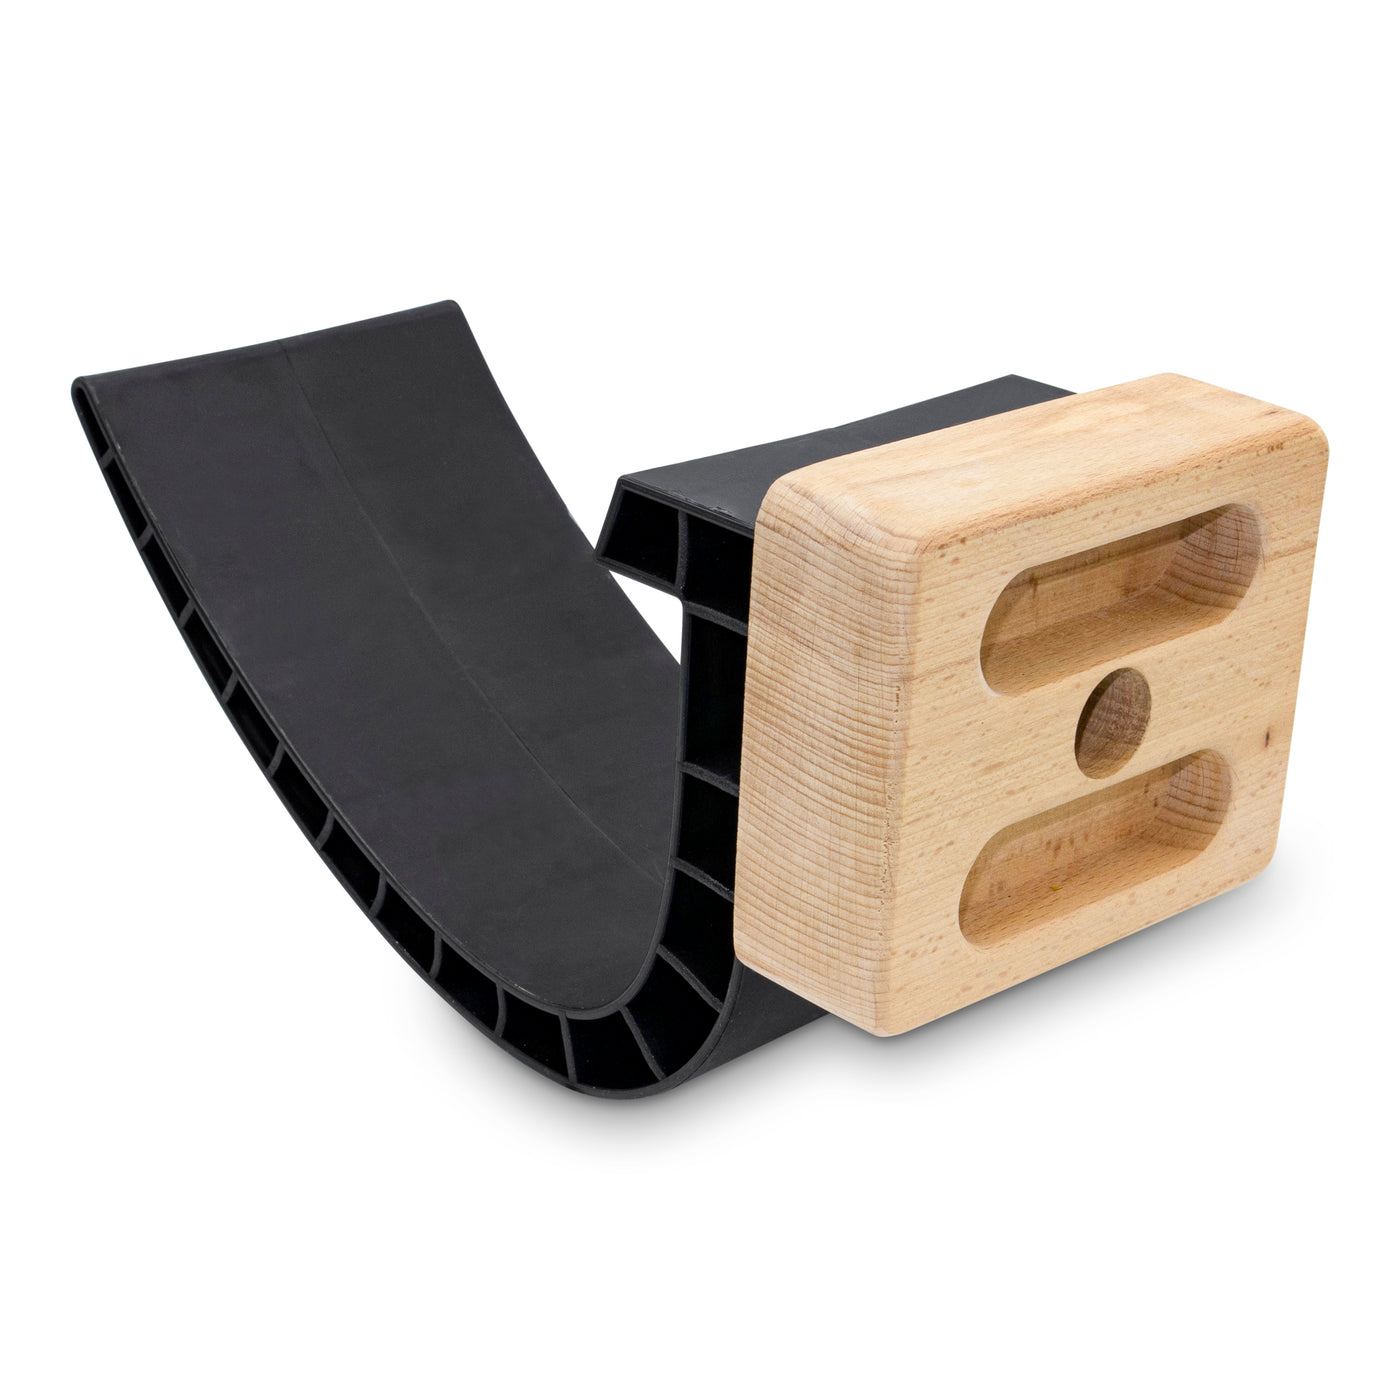 Wooden Rock Climbing Holds - Blocks with Slots